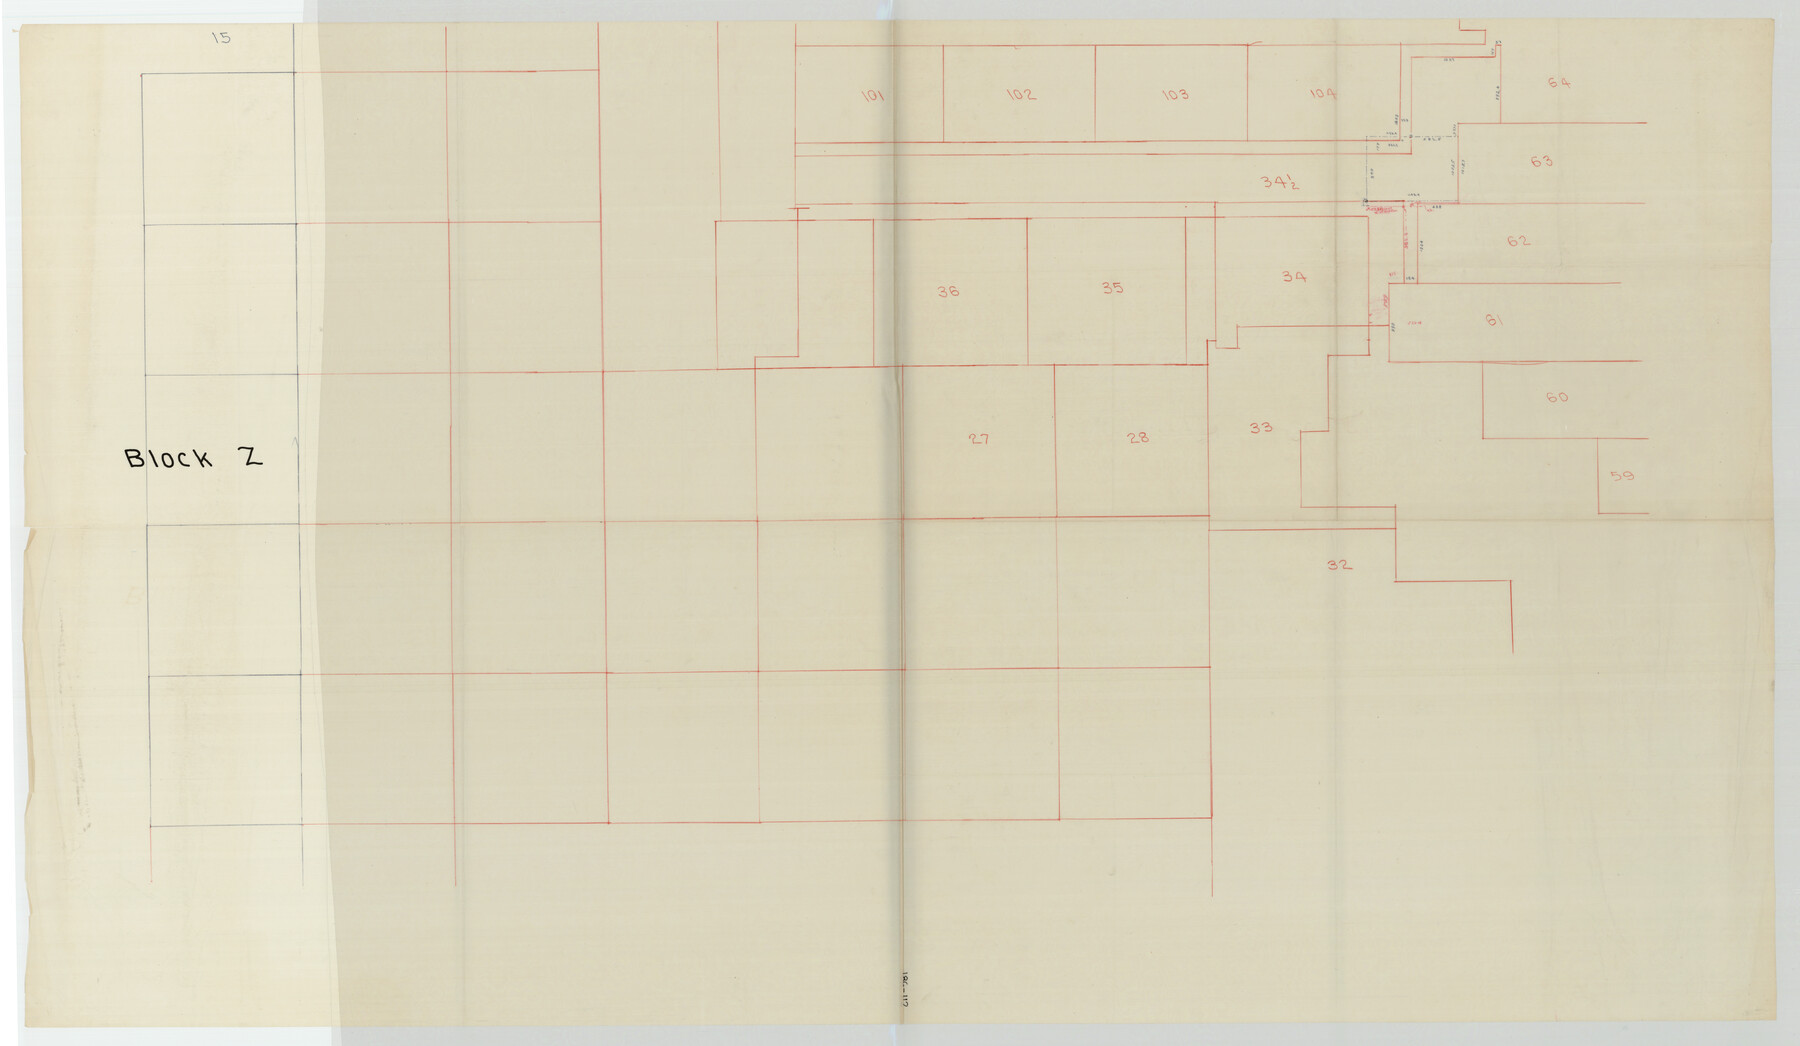 93167, [Sketch of sections 59-64, I. & G. N. Block 1 and part of Block Z], Twichell Survey Records